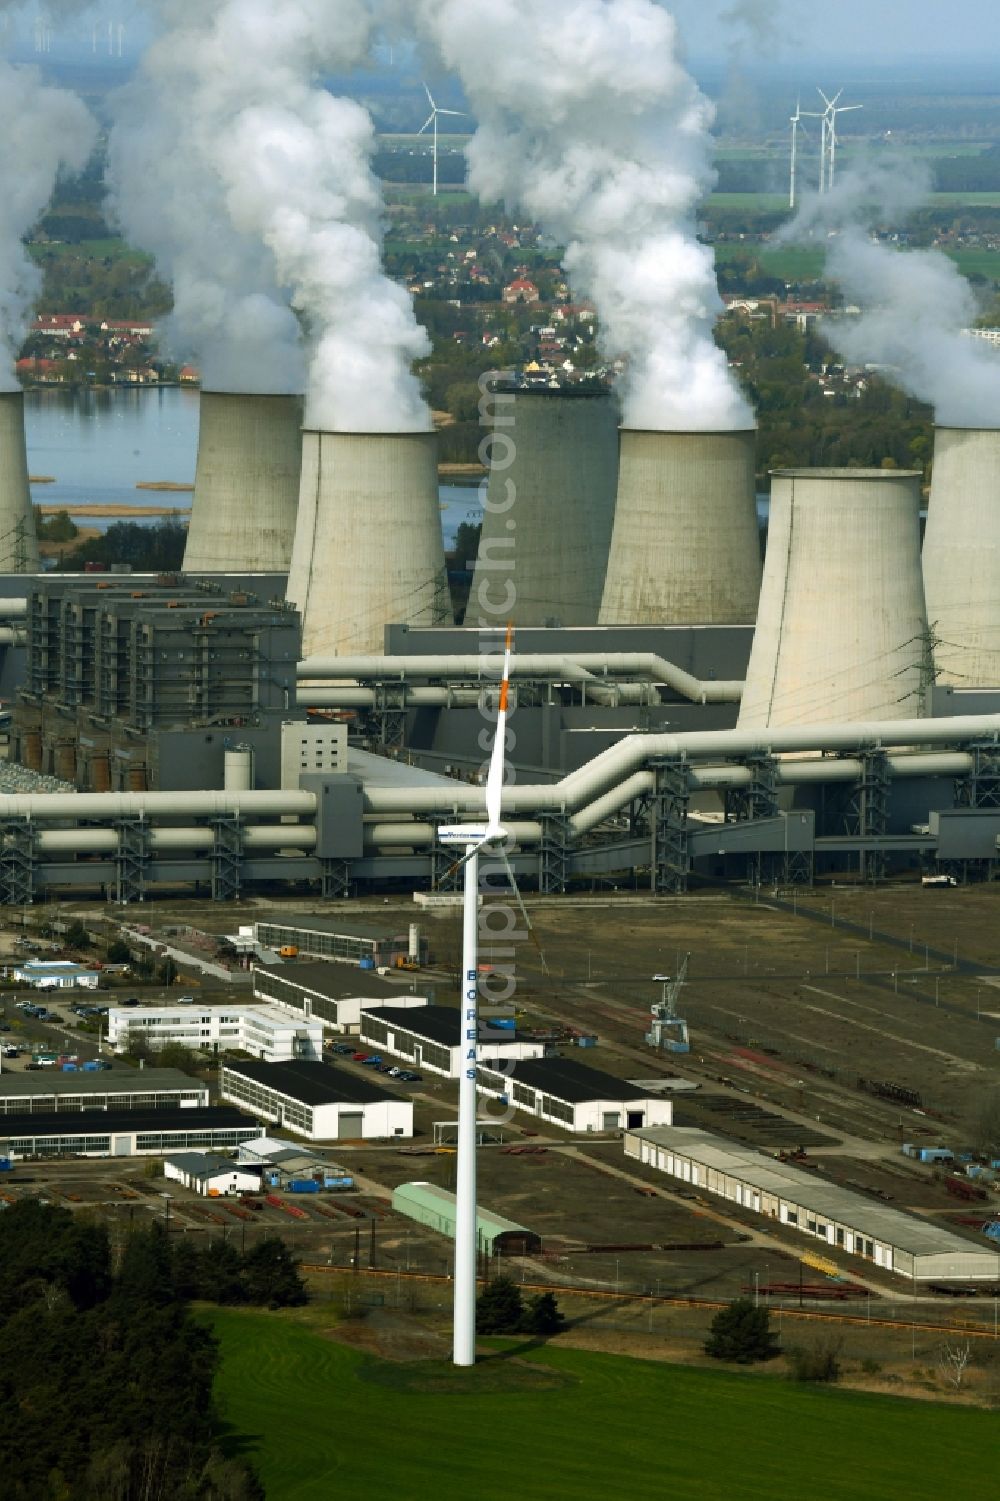 Aerial image Teichland - Clouds of exhaust gas in the cooling towers of the power plant Jaenschwalde, a lignite-fired thermal power plant in southeastern Brandenburg, Germany. Power plant operator is to Vattenfall Europe belonging Vattenfall Europe Generation AG, which emerged from VEAG